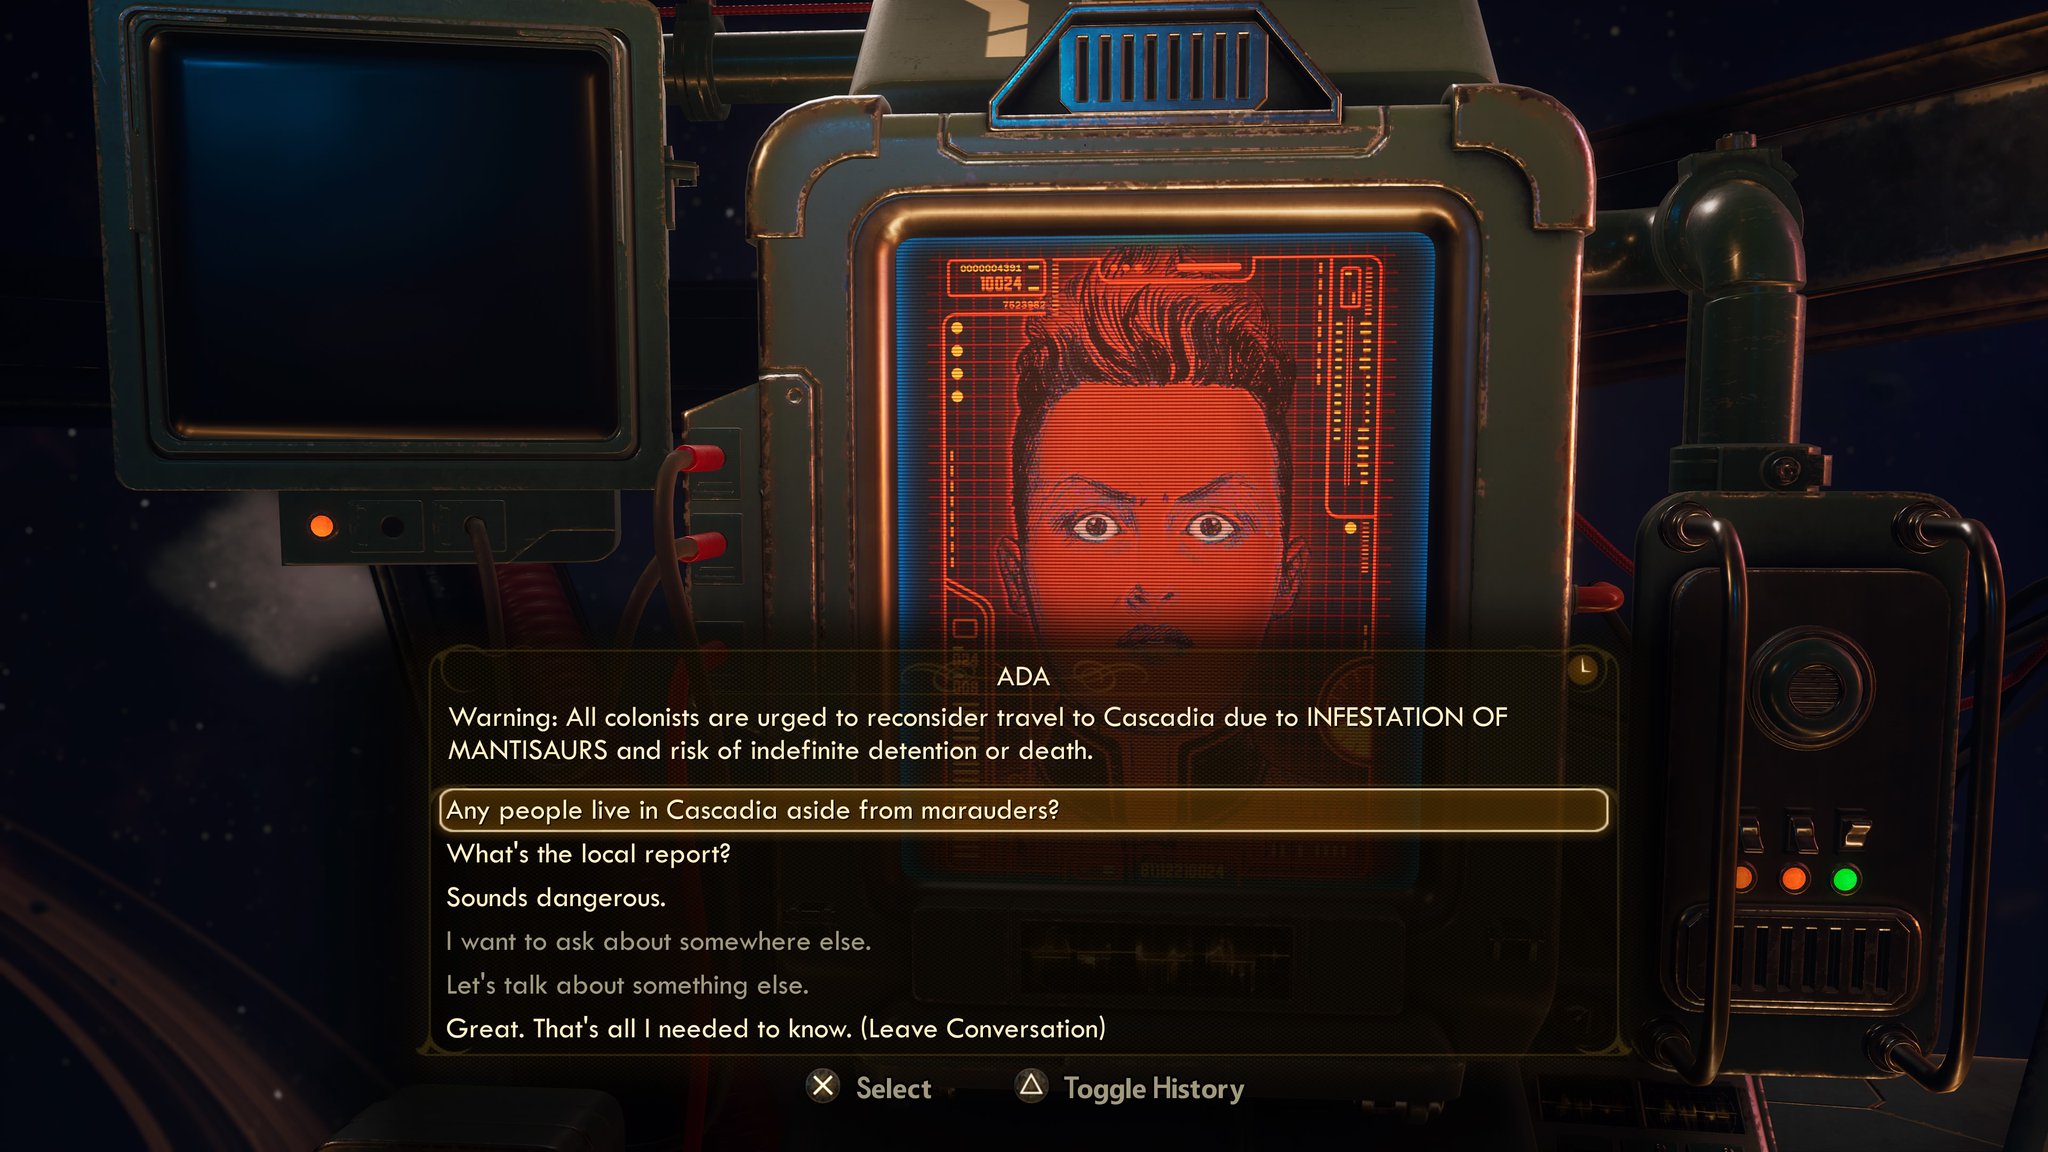 The Outer Worlds review: A great RPG if you ignore the characters